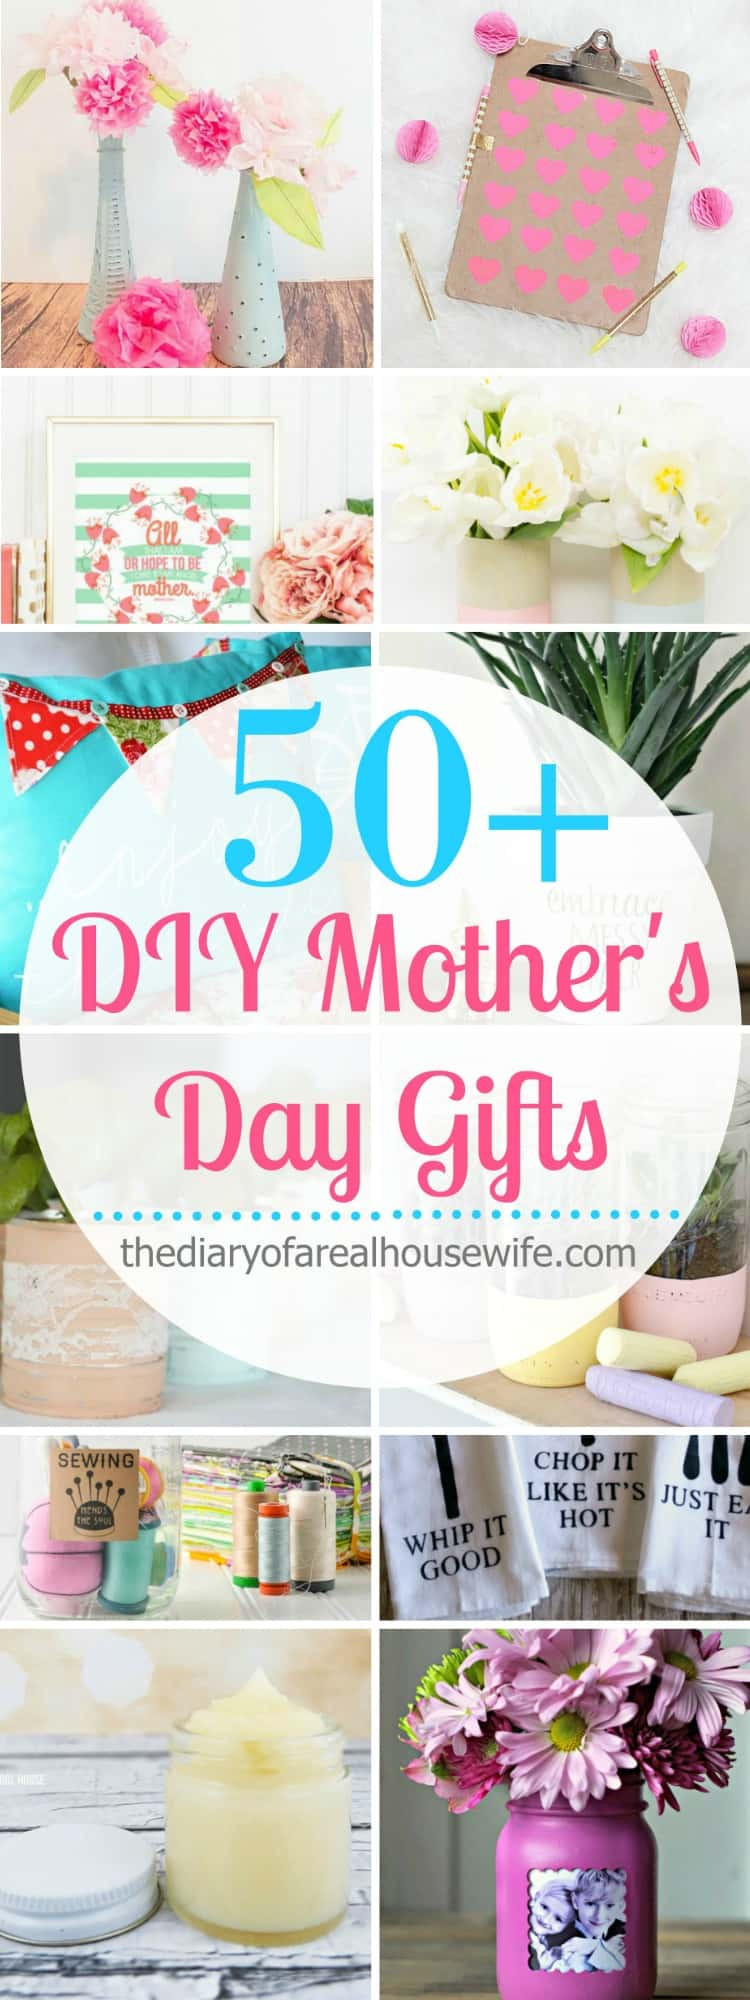 Awesome Mothers Day Gift Ideas DIY Mother s Day Gift Ideas The Diary of a Real Housewife